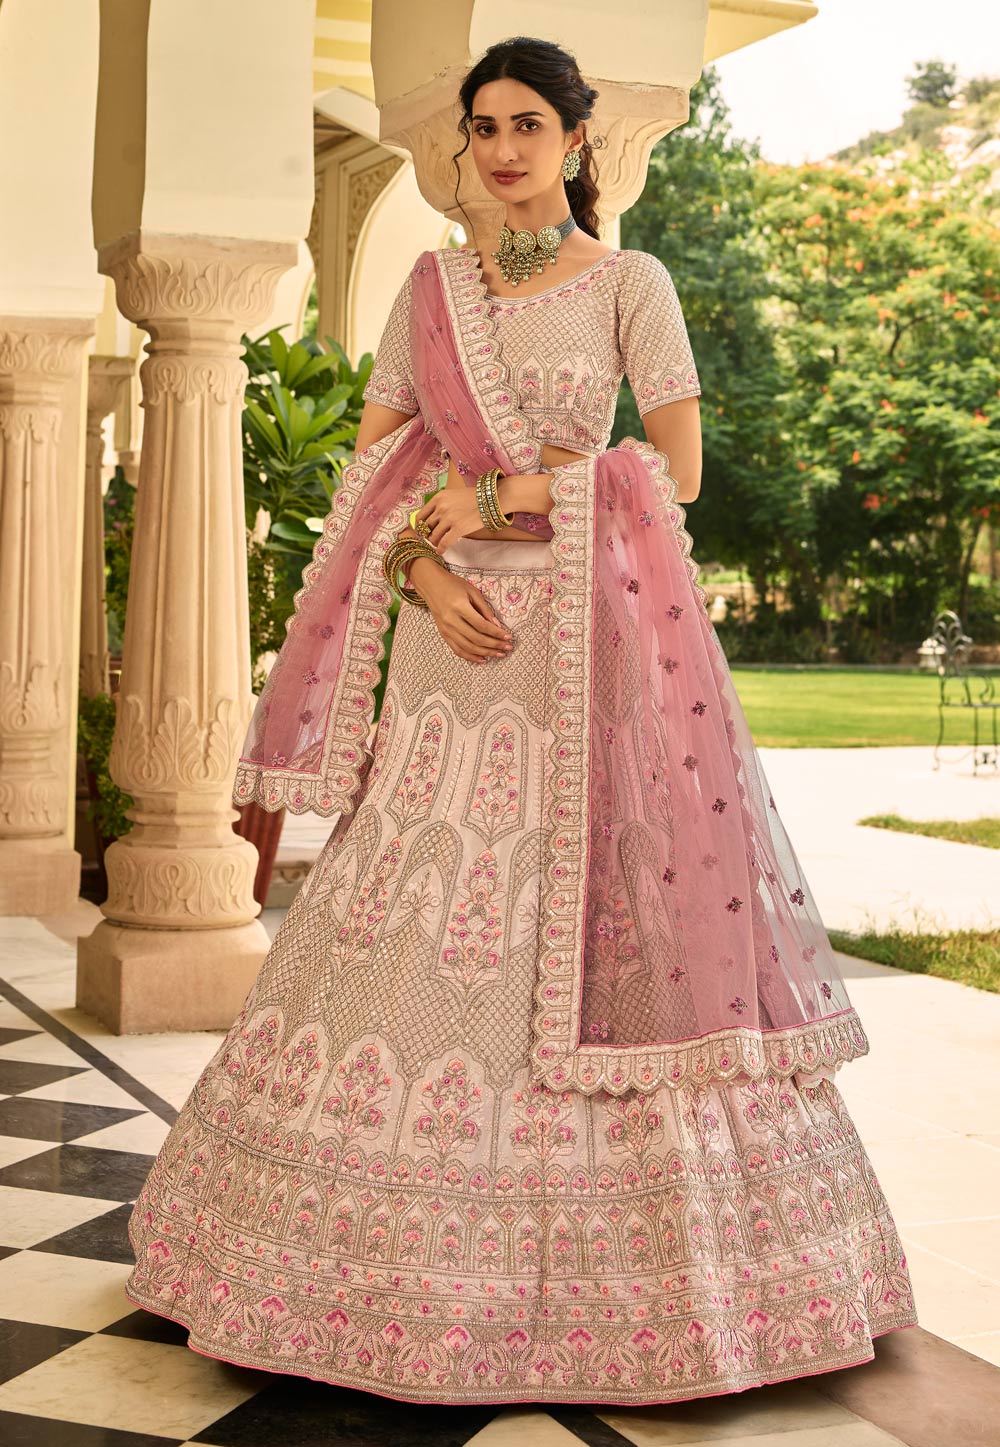 Rani Pink Chinon Silk Lehenga Choli For Party Functions – tapee.in